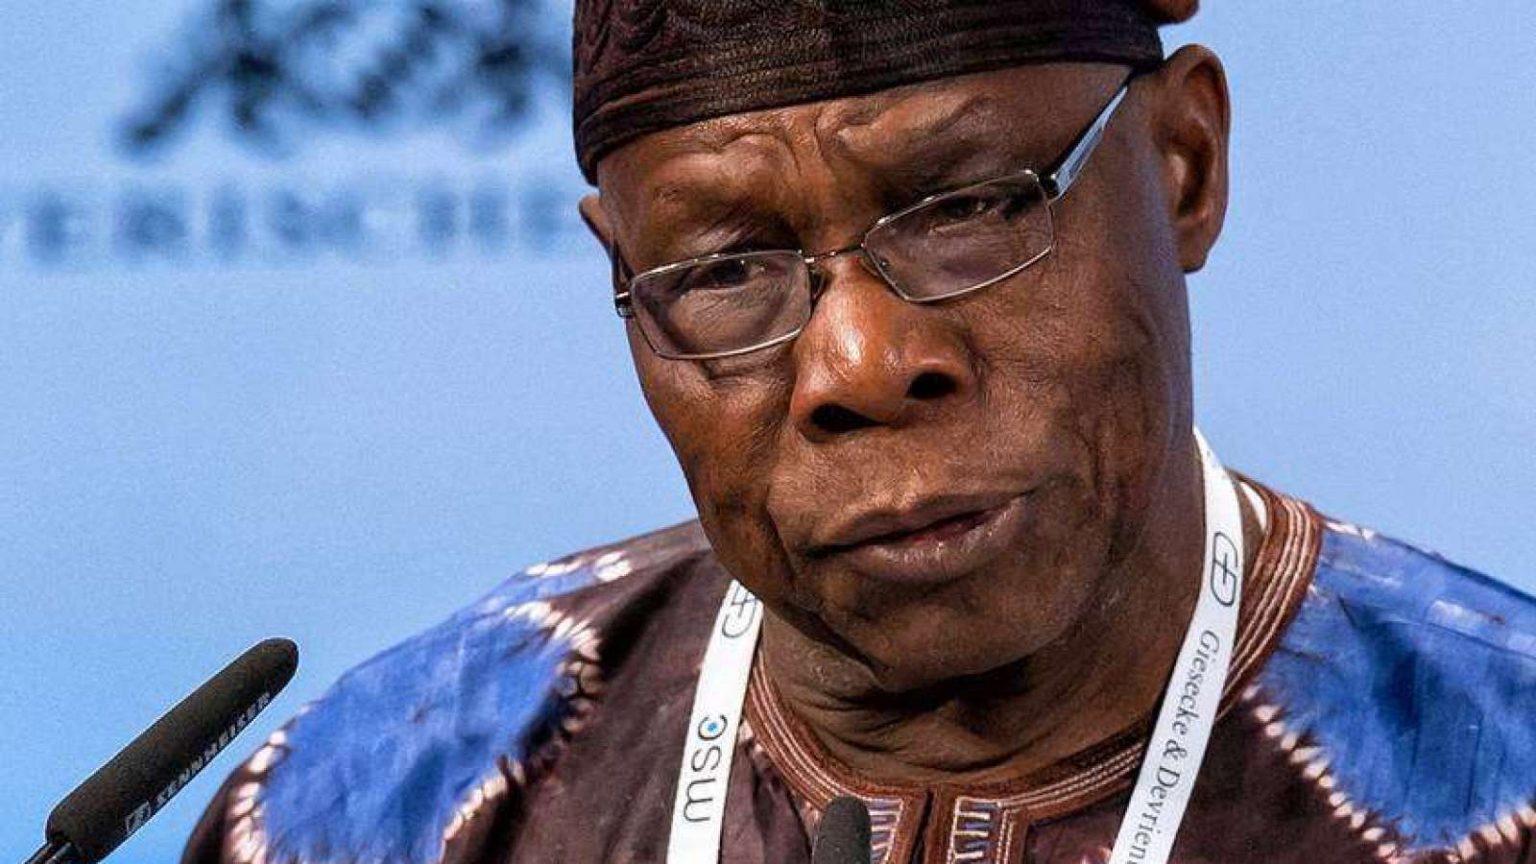 Olusegun Obasanjo reacts after Hoodlums set fire on his Benue Farm